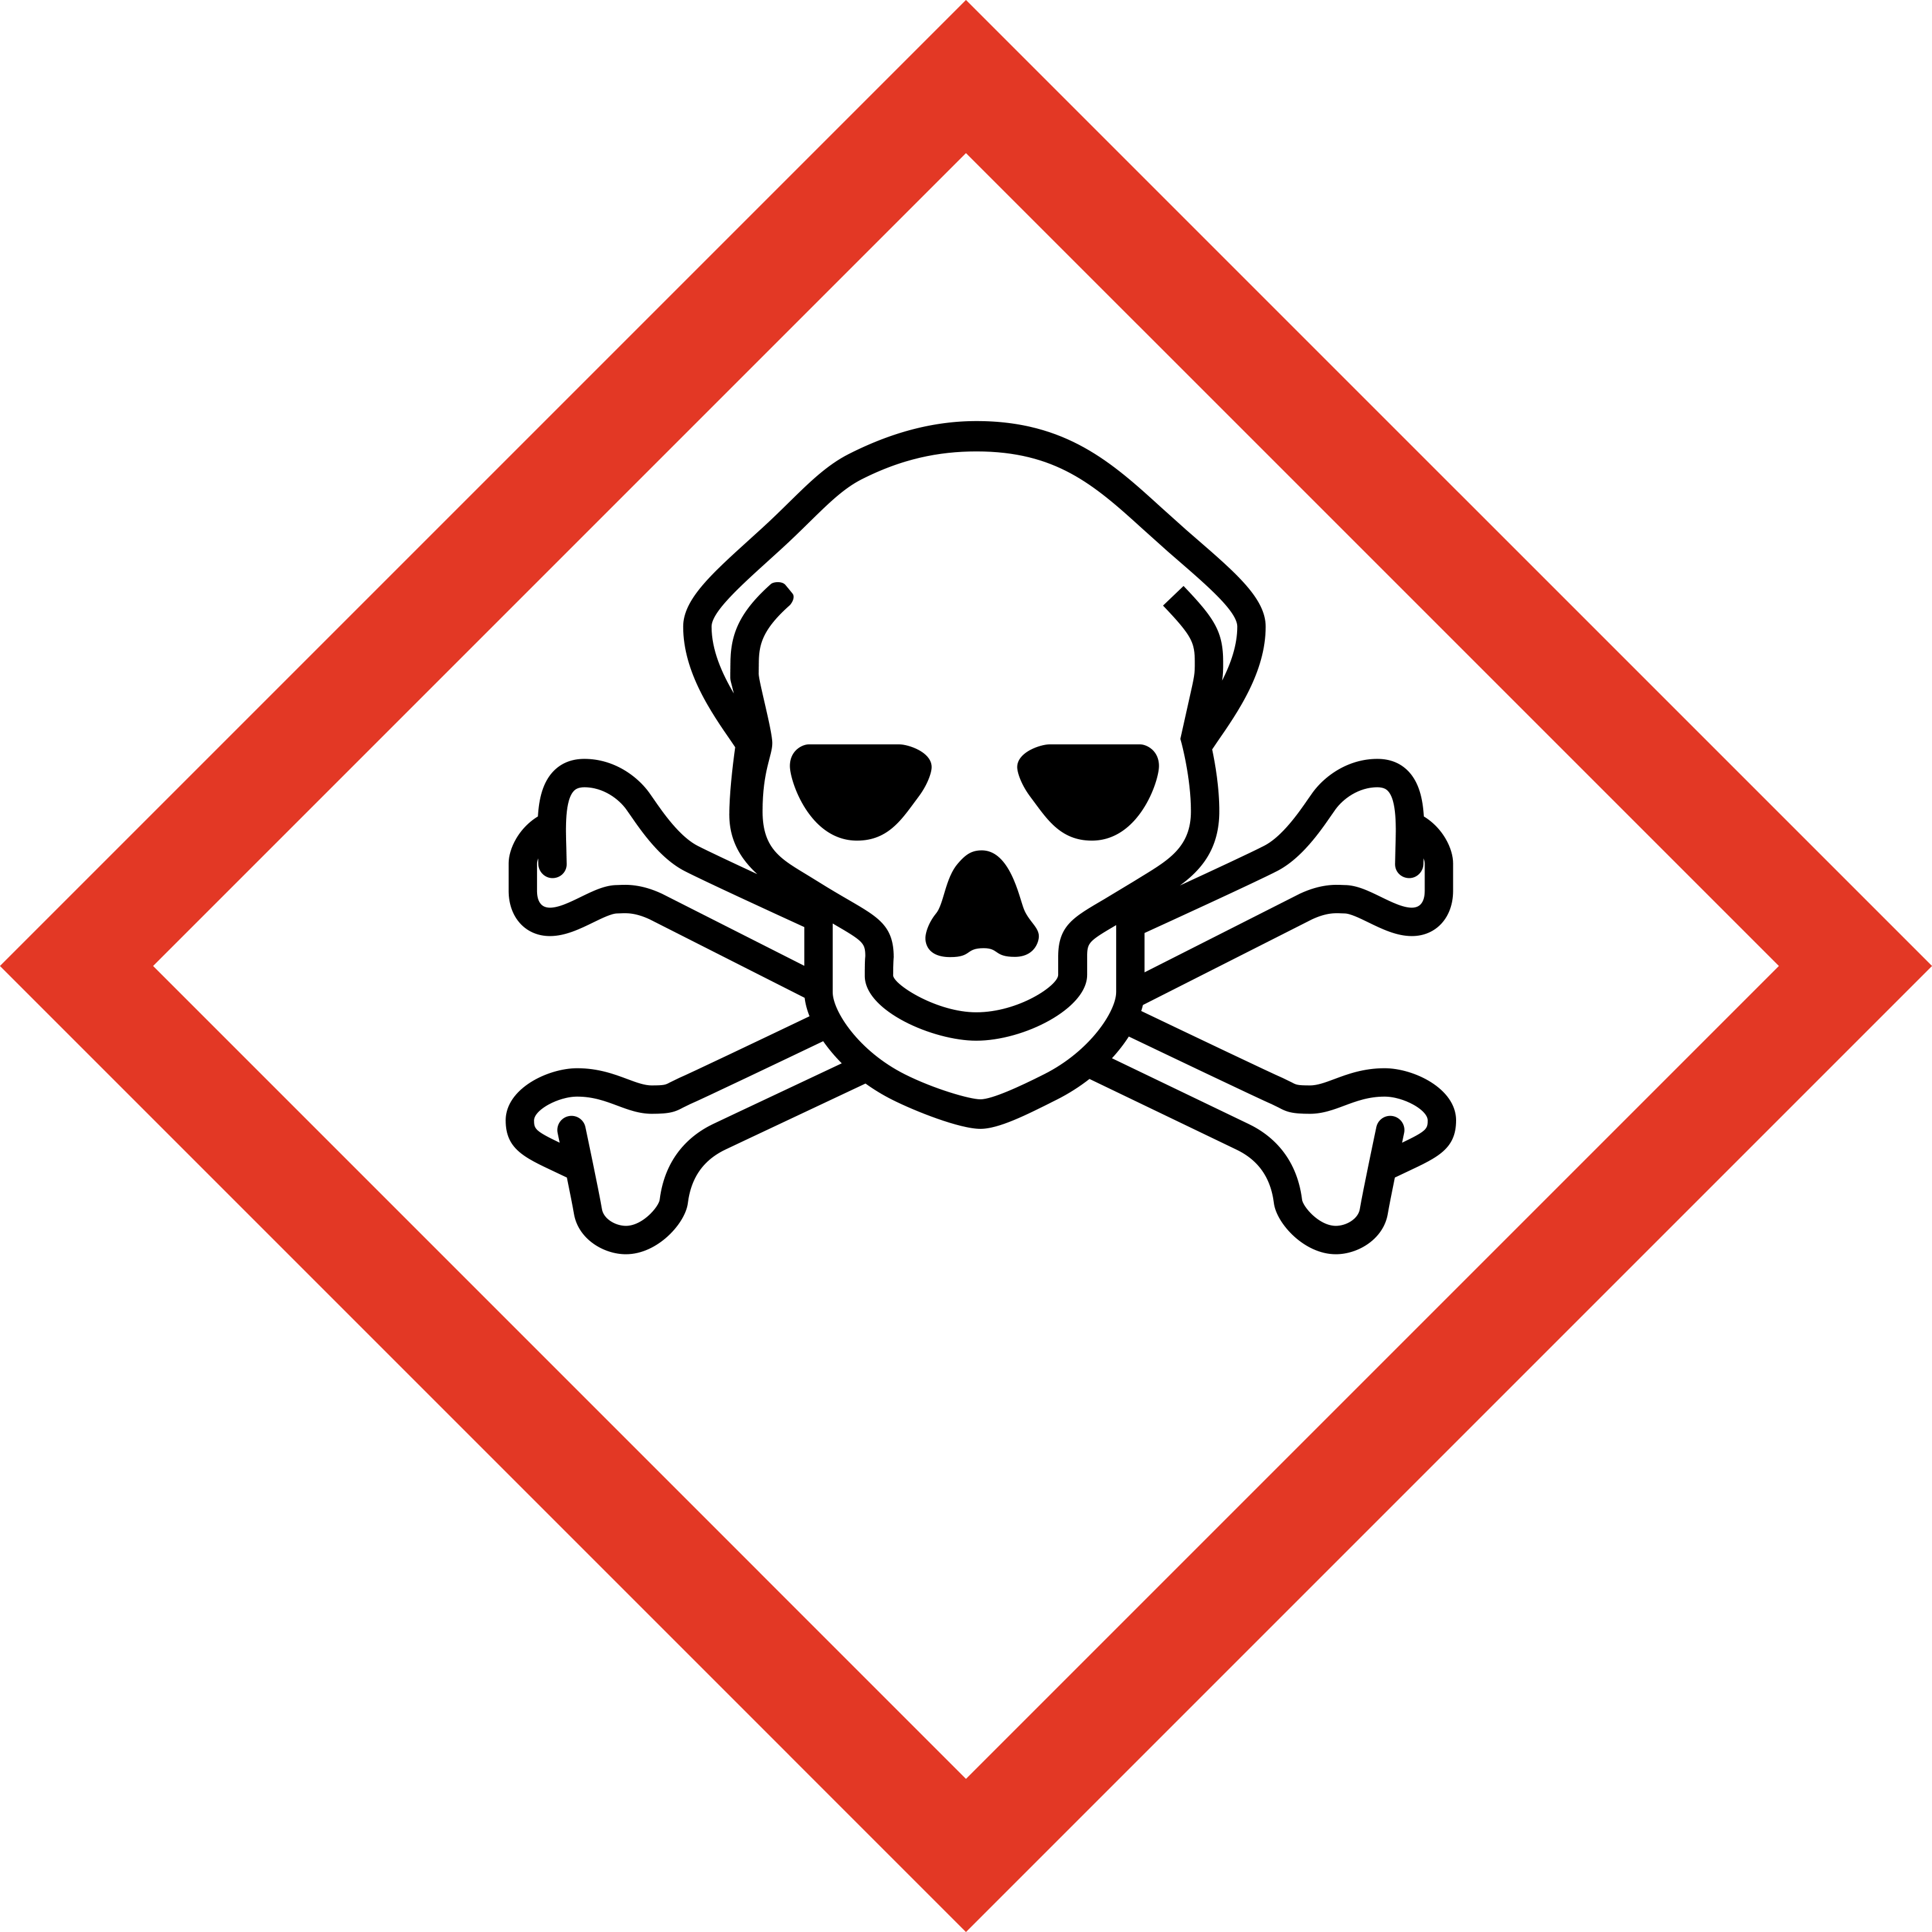 Pictogram of Toxic Substances :